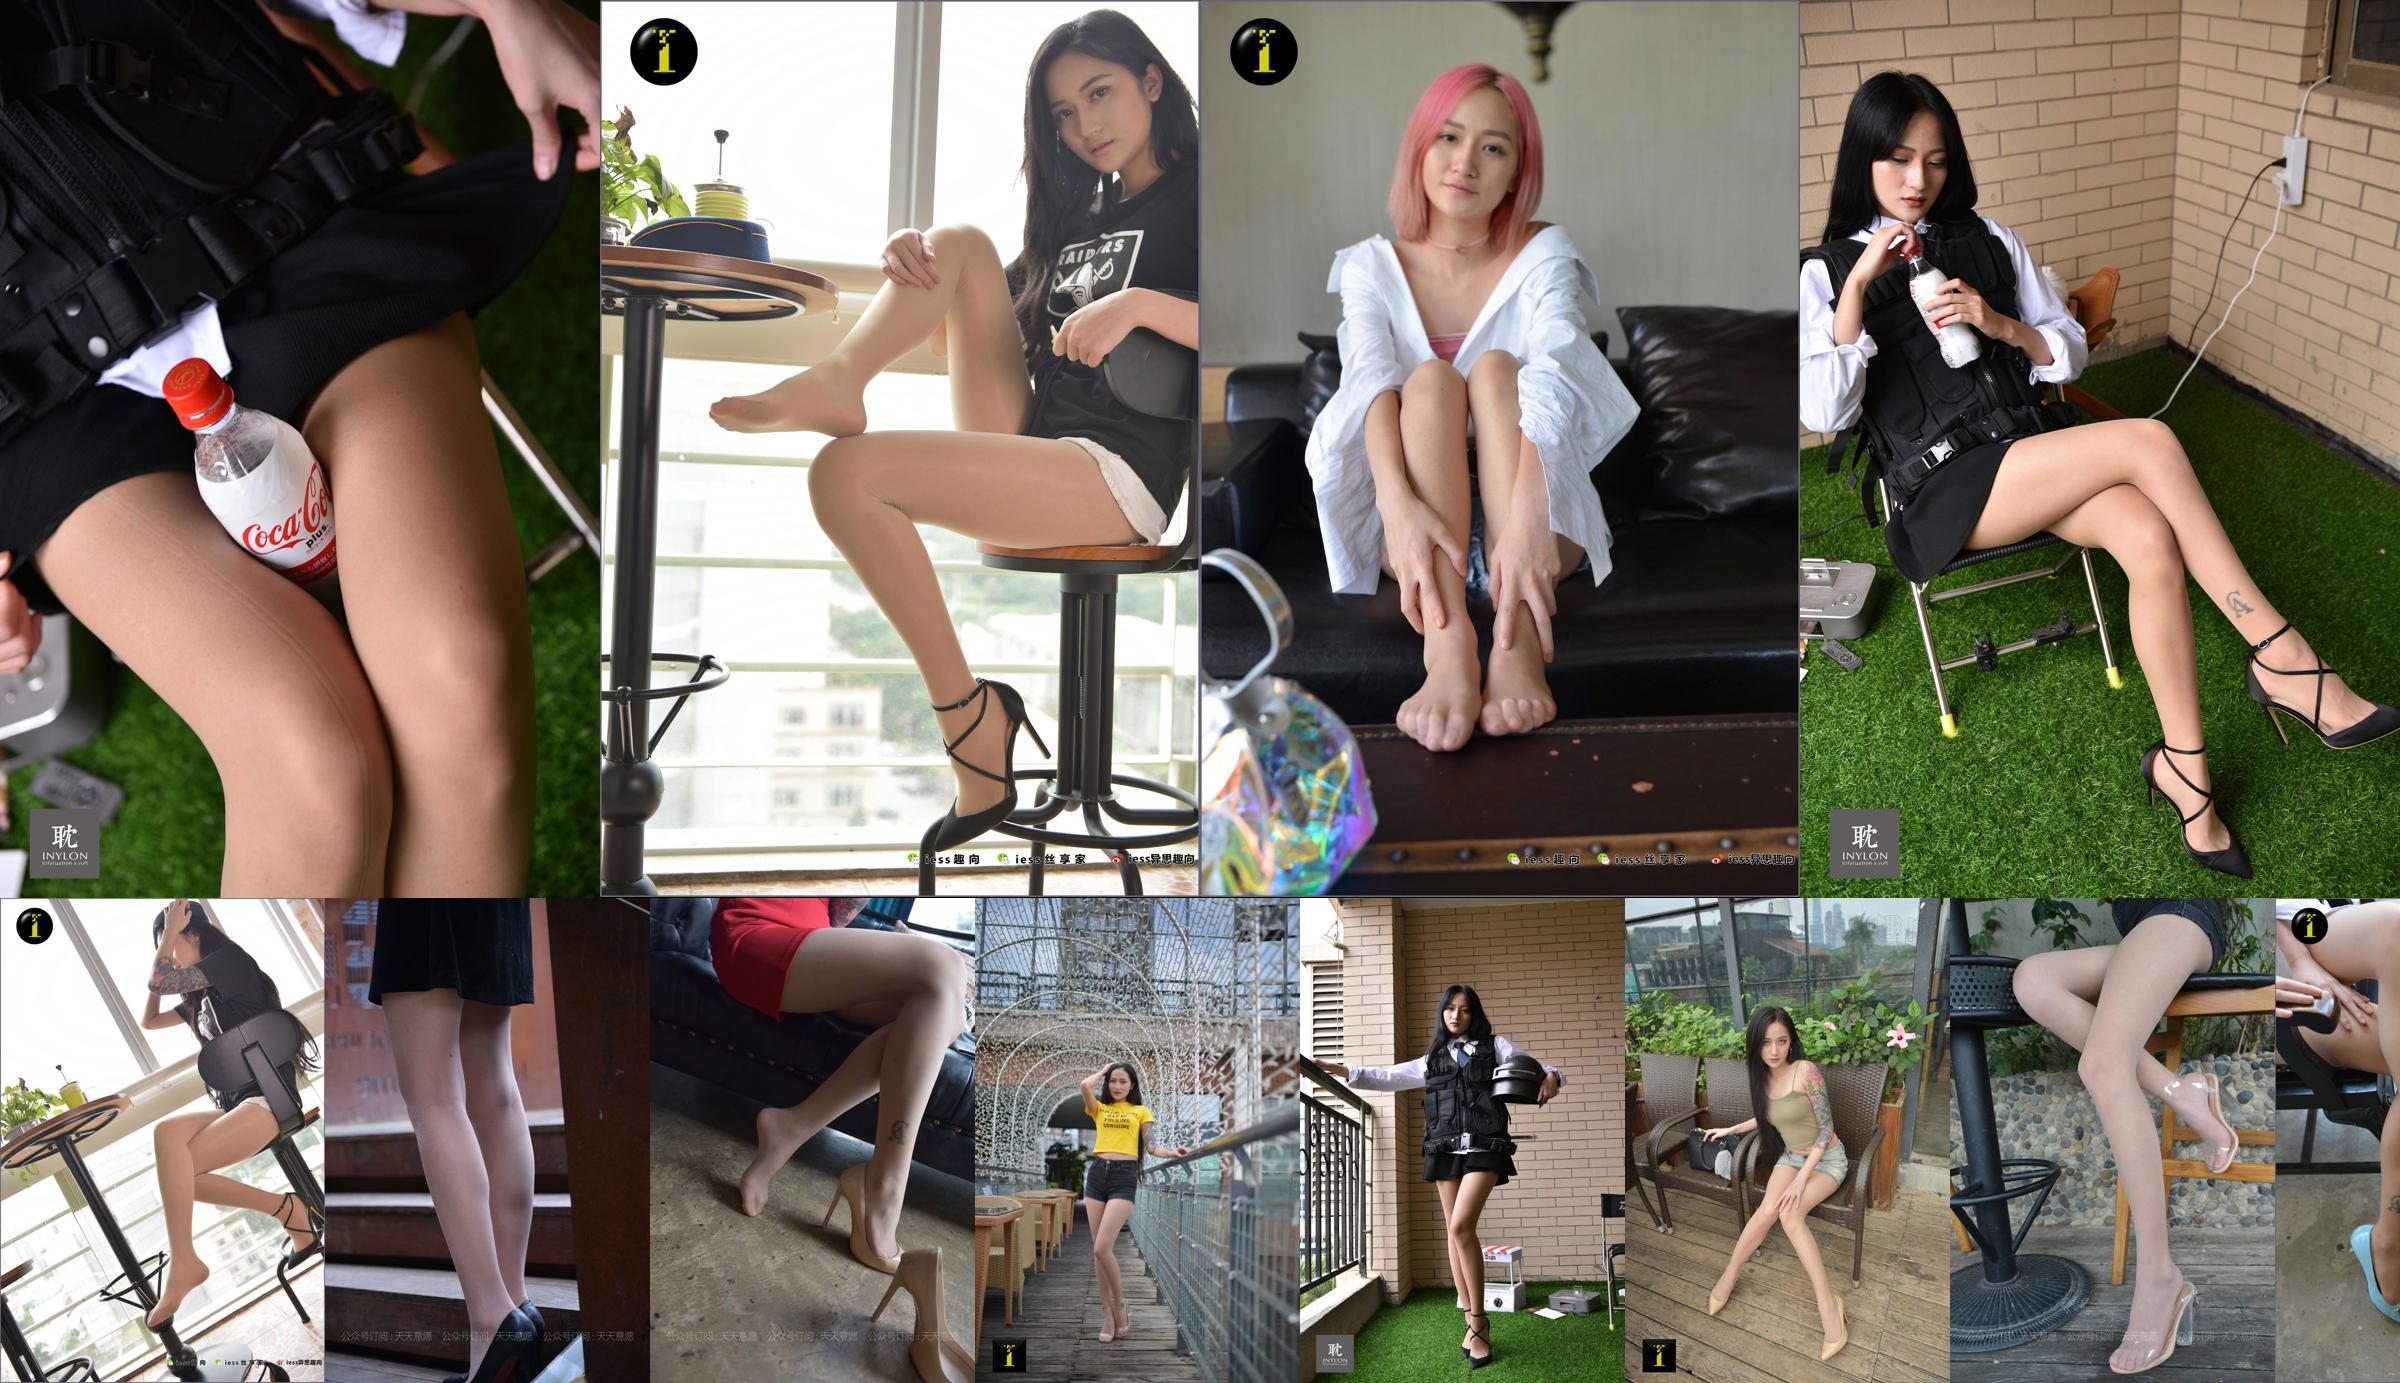 [IESS 奇思趣向] Model: Xiaoxiao "Long-legged Flower Spice Girl" No.1242b3 Page 1